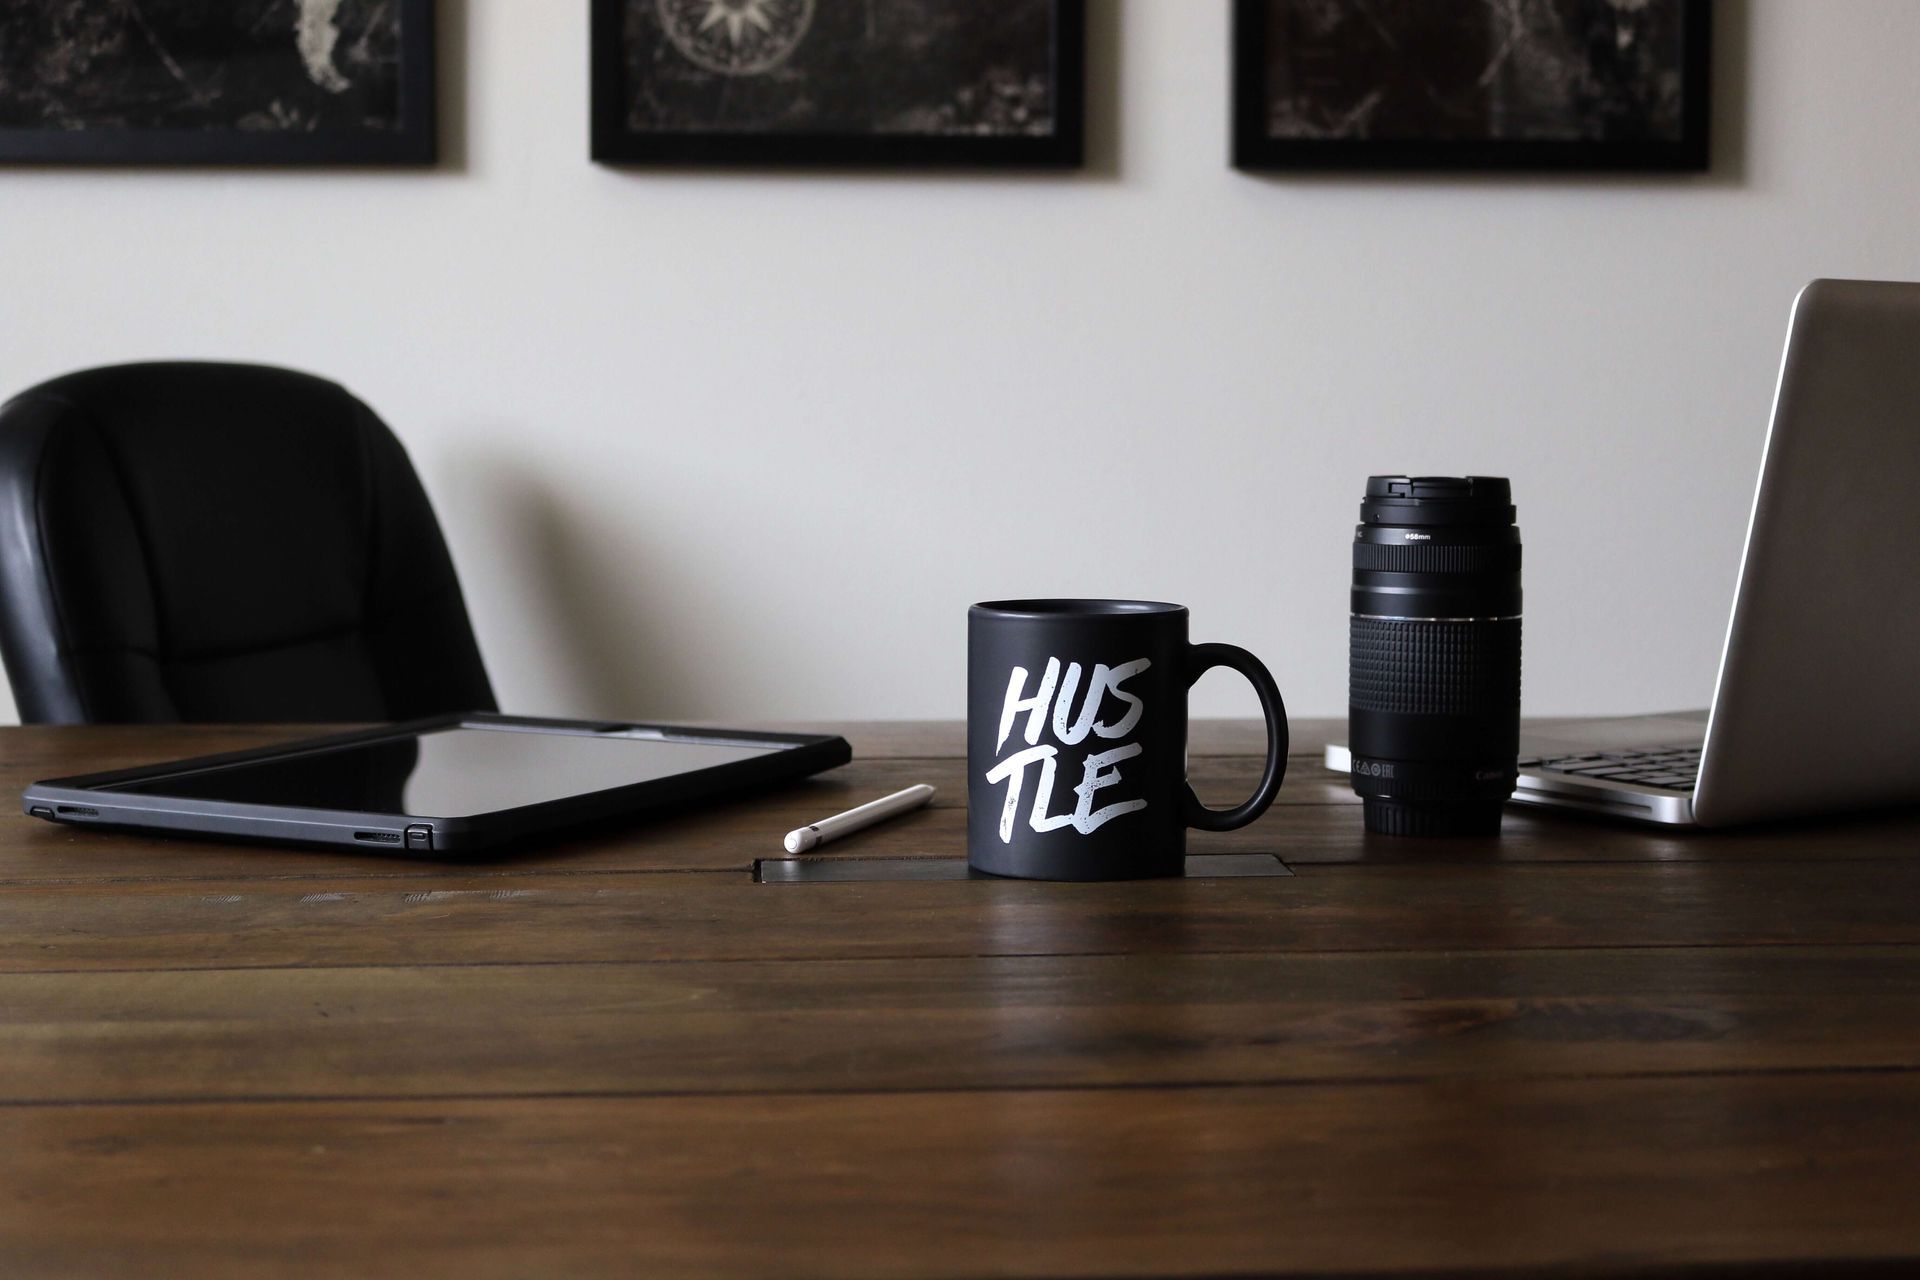 Office Desk with Laptop and Mug that has Hustle on it - Small Business Growth Coaching